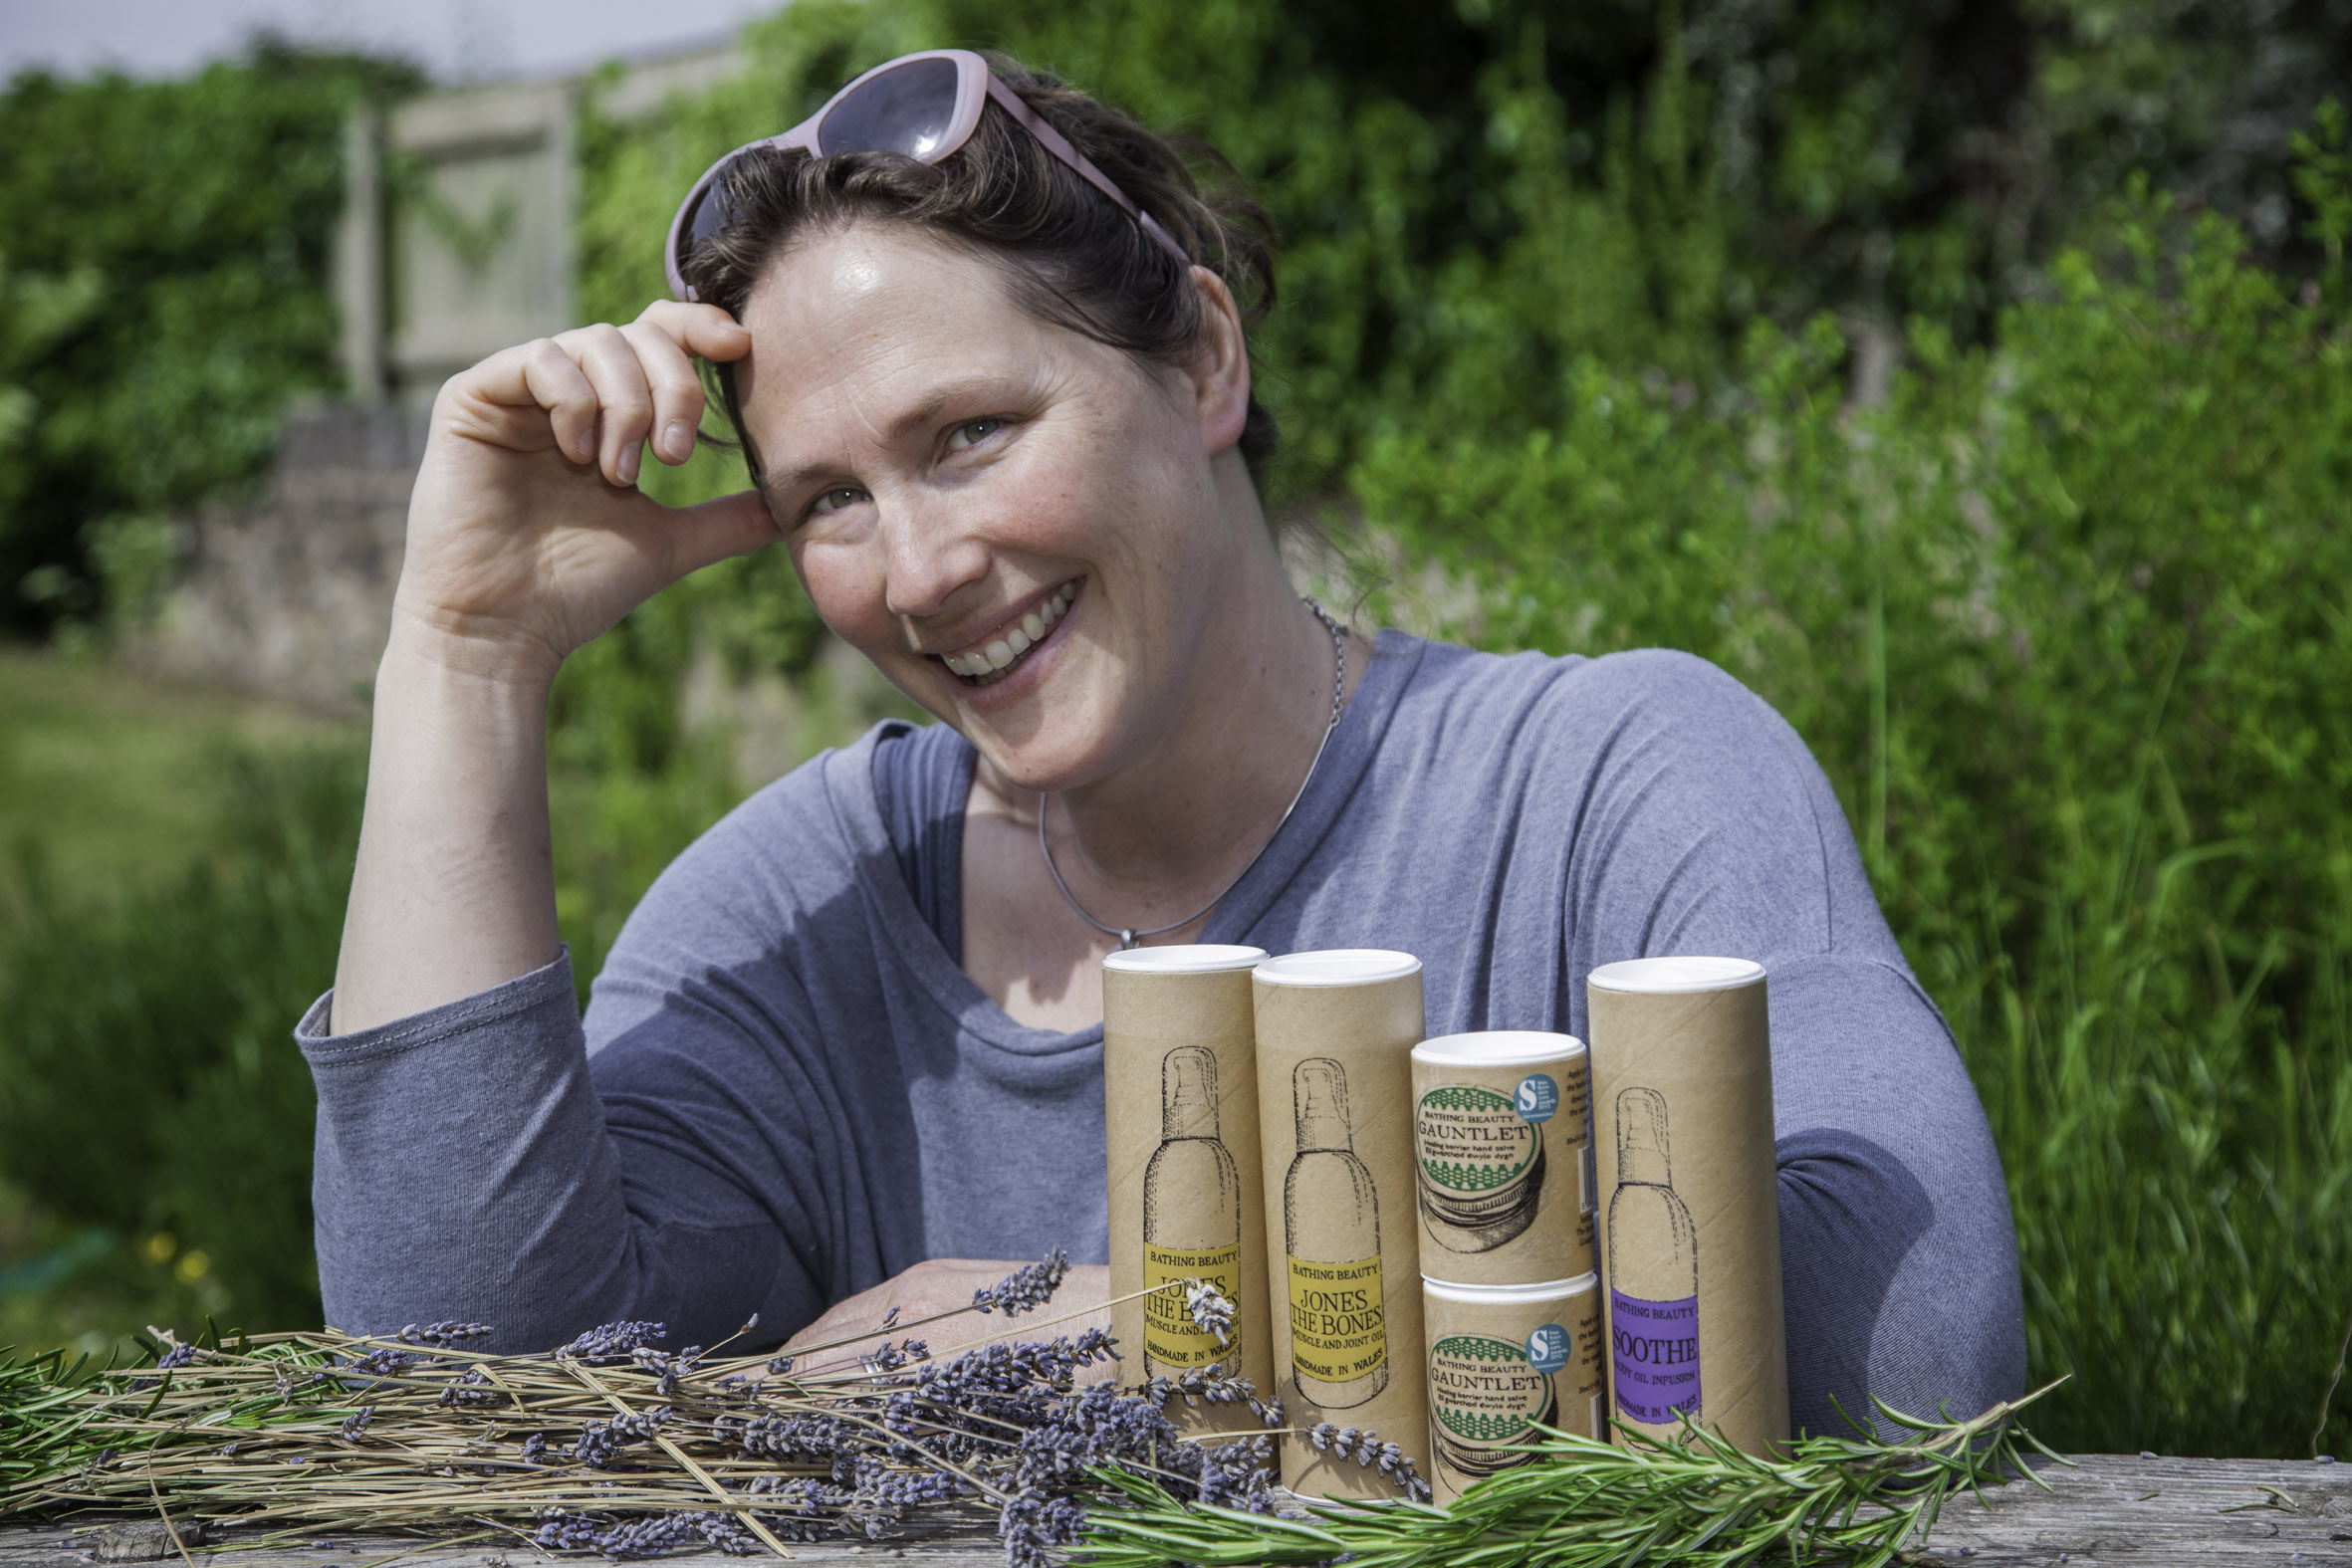 Skin care company lands beauty of an export deal